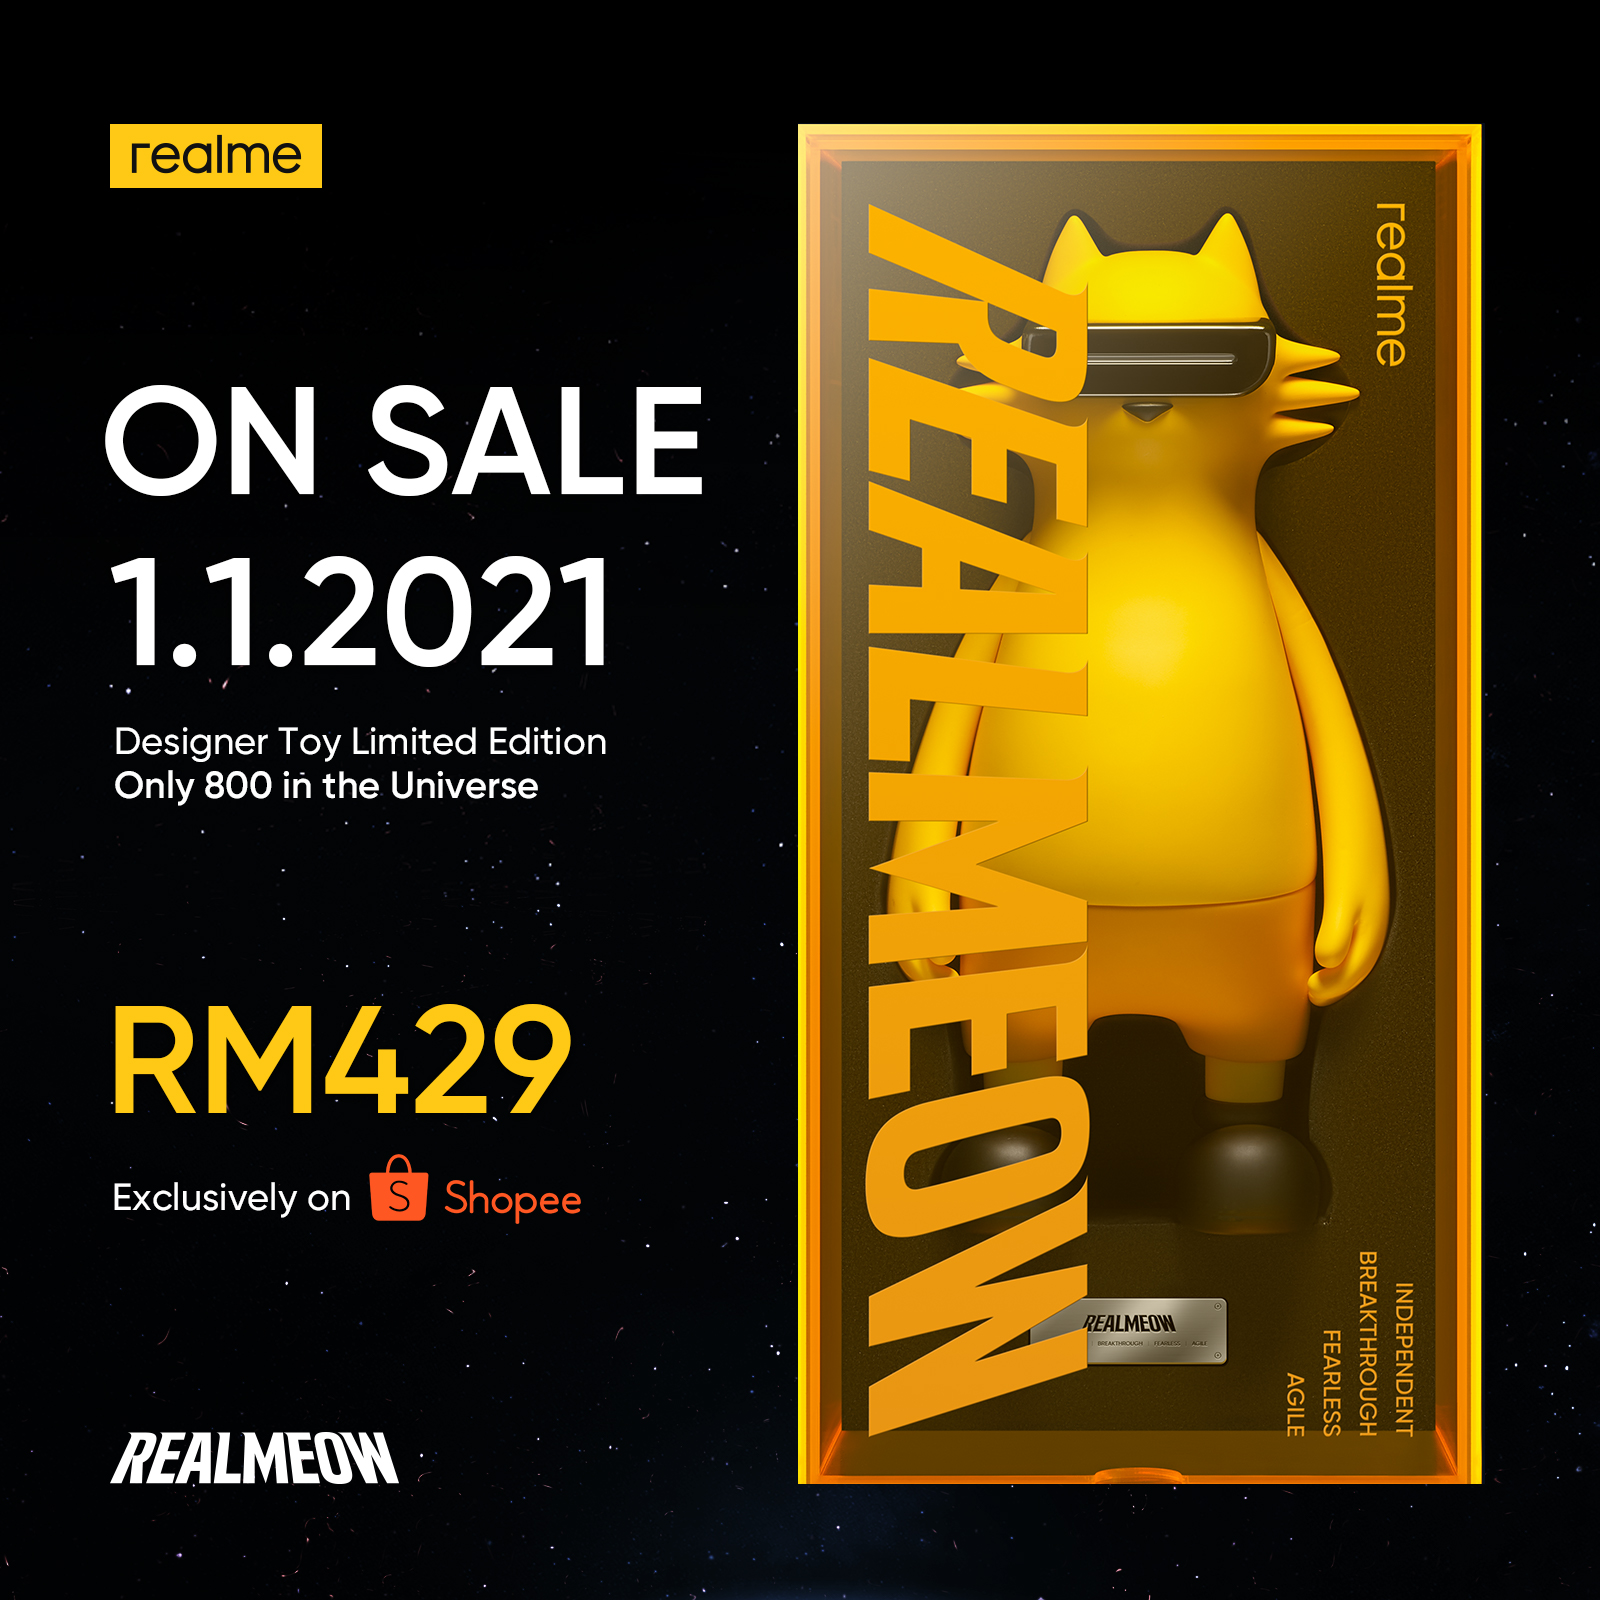 BE THE OWNER OF REALMEOW FROM 1ST OF JANUARY 2021 ONWARDS, ONLY 800 UNITS AVAILABLE IN THE UNIVERSE